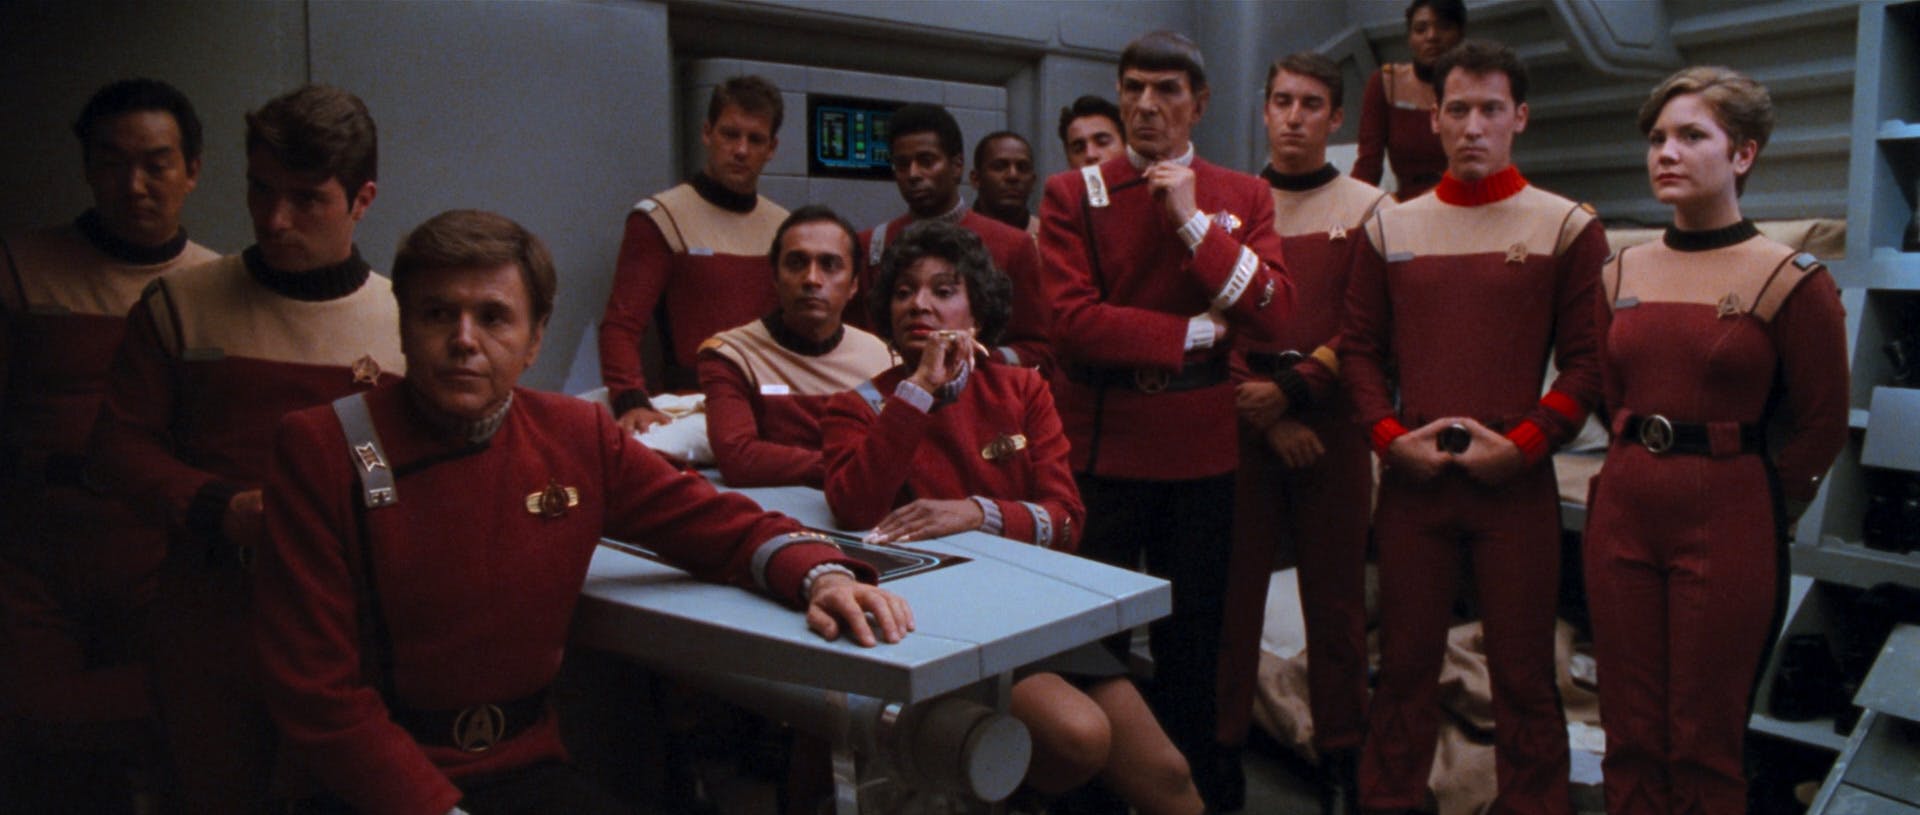 The crew observes a search aboard the Enterprise in Star Trek VI: The Undiscovered Country